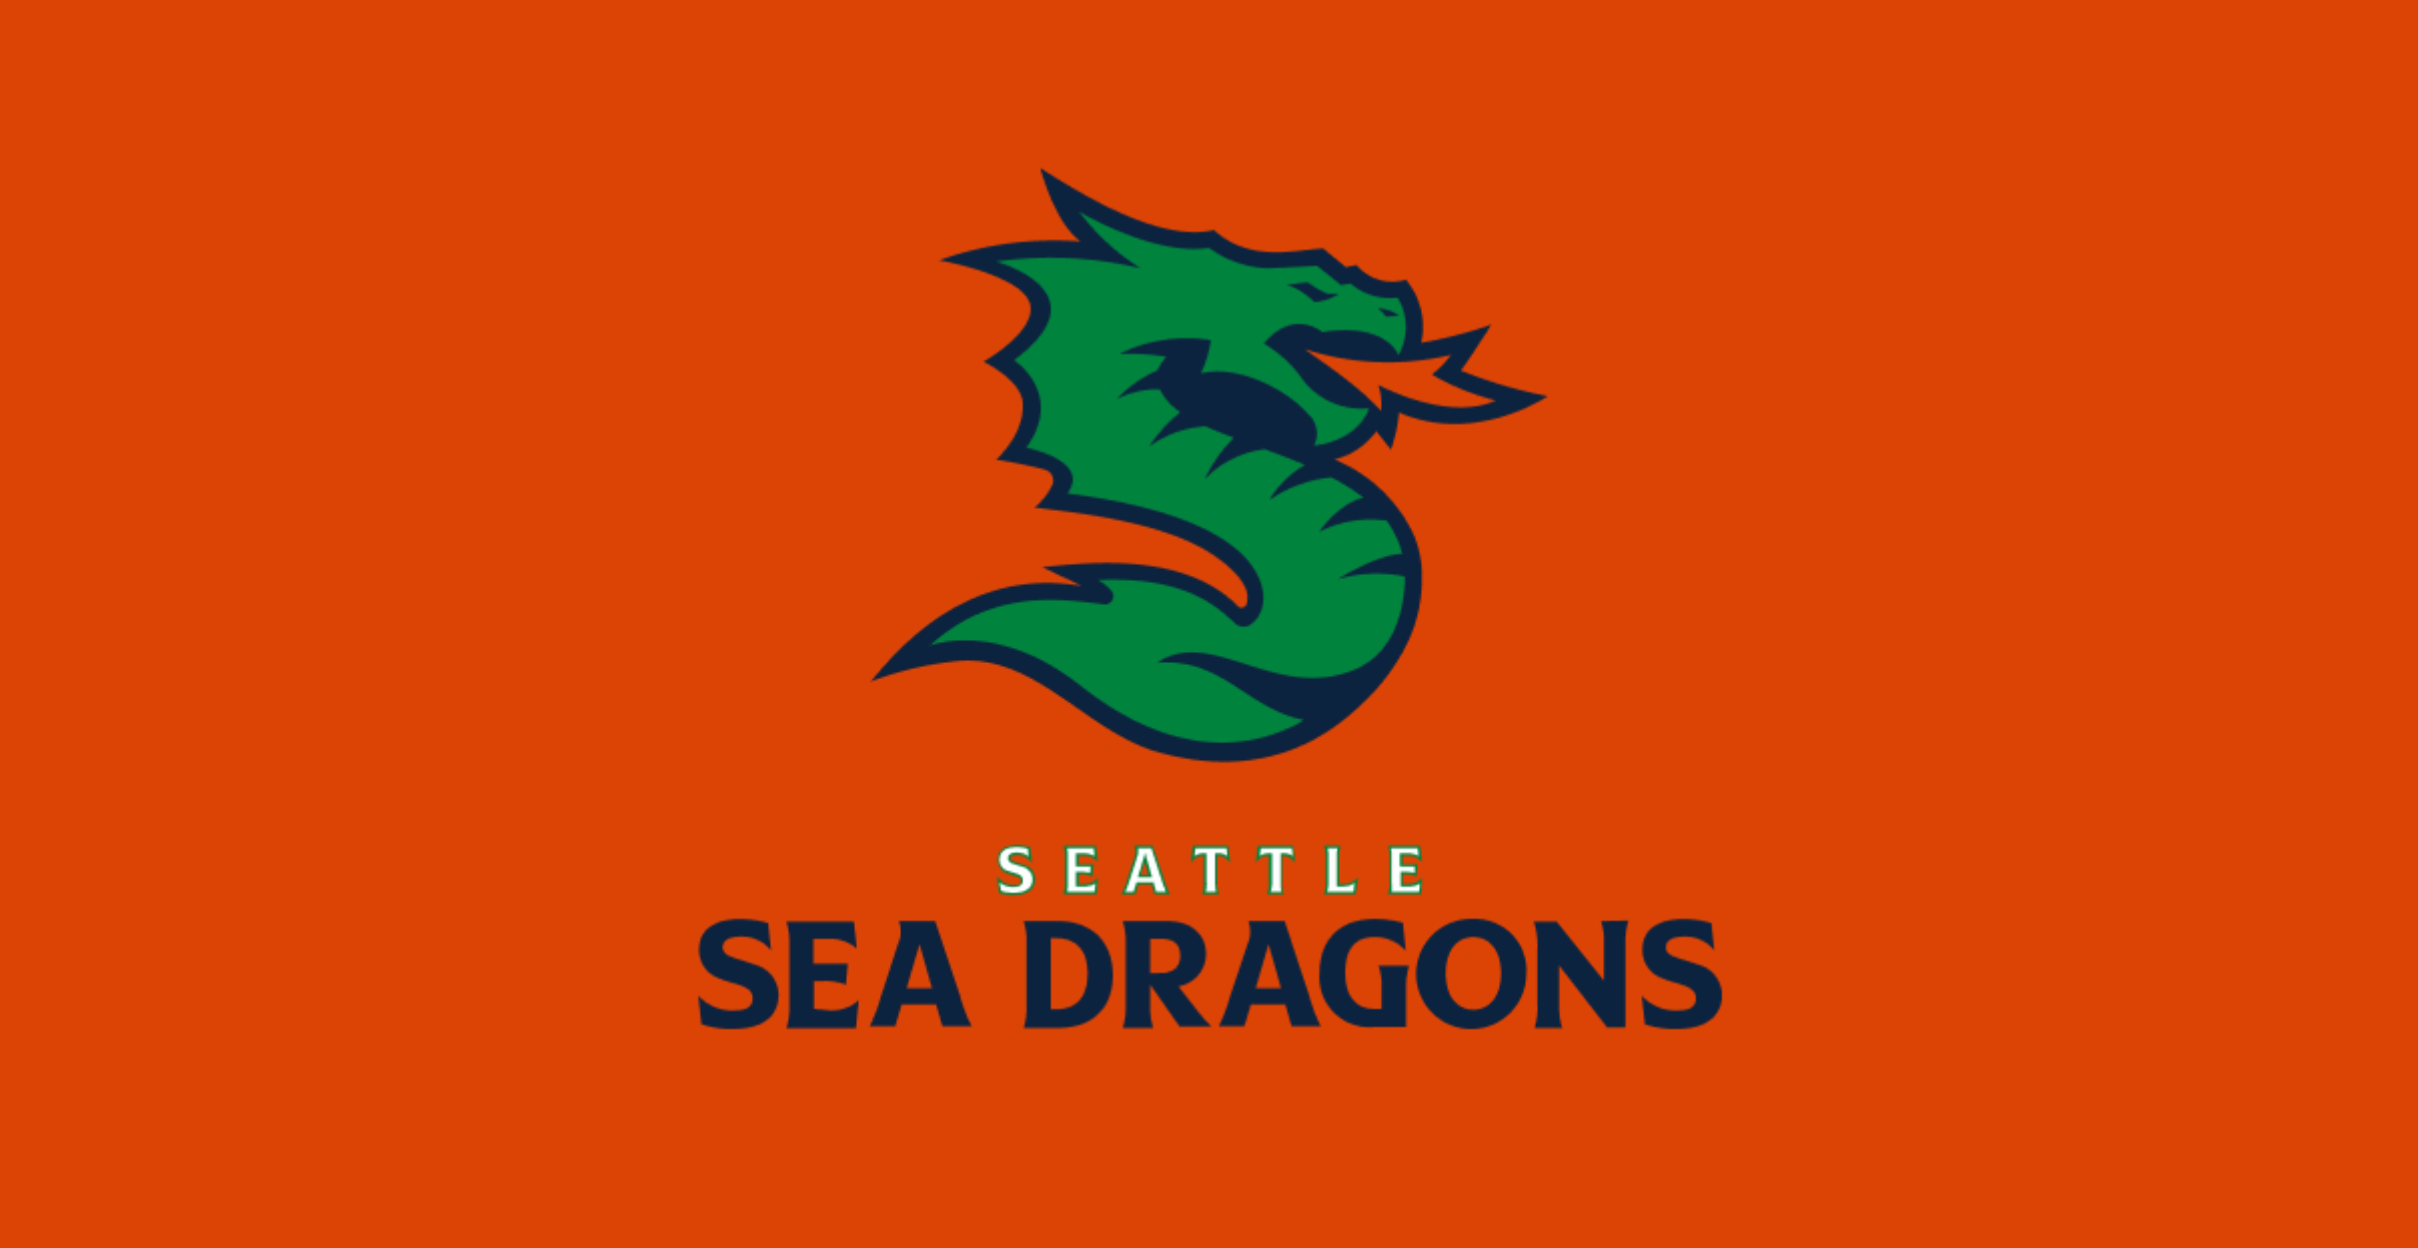 Seattle Storm - Good luck to Seattle Sea Dragons in their